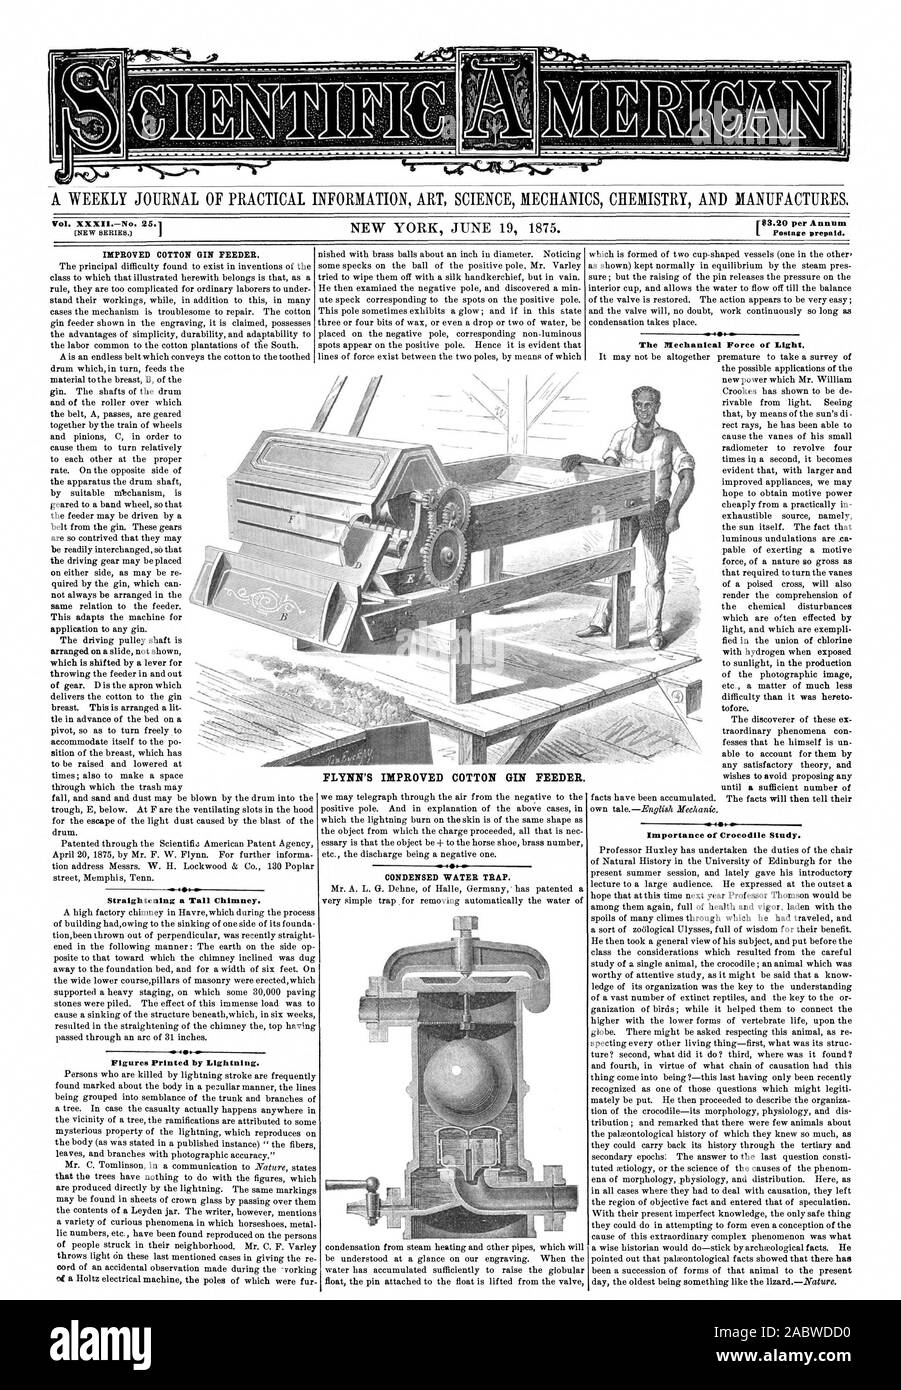 r$3.20 per Annum Vol. XXXIINo. 25.1 IMPROVED COTTON GIN FEEDER. Straightening a Tall Chimney. 4. Figures Printed by Lightning. FLYNN'S IMPROVED COTTON GIN FEEDER. CONDENSED WATER TRAP. The Mechanical Force of Light. Importance of Crocodile Study., scientific american, 1875-06-19 Stock Photo